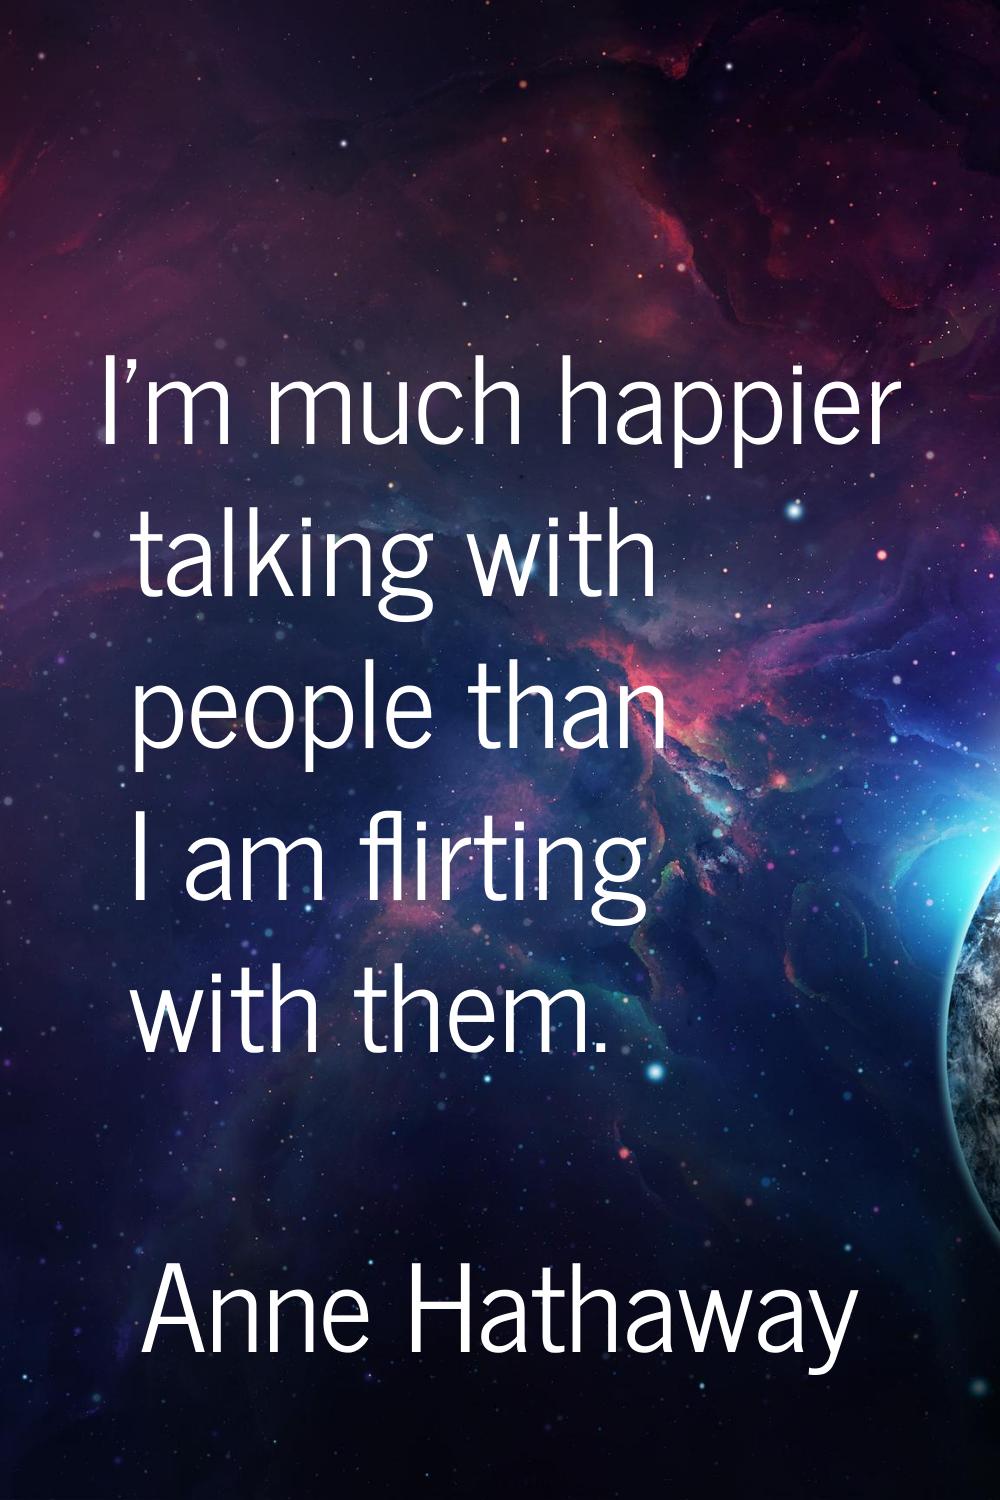 I'm much happier talking with people than I am flirting with them.